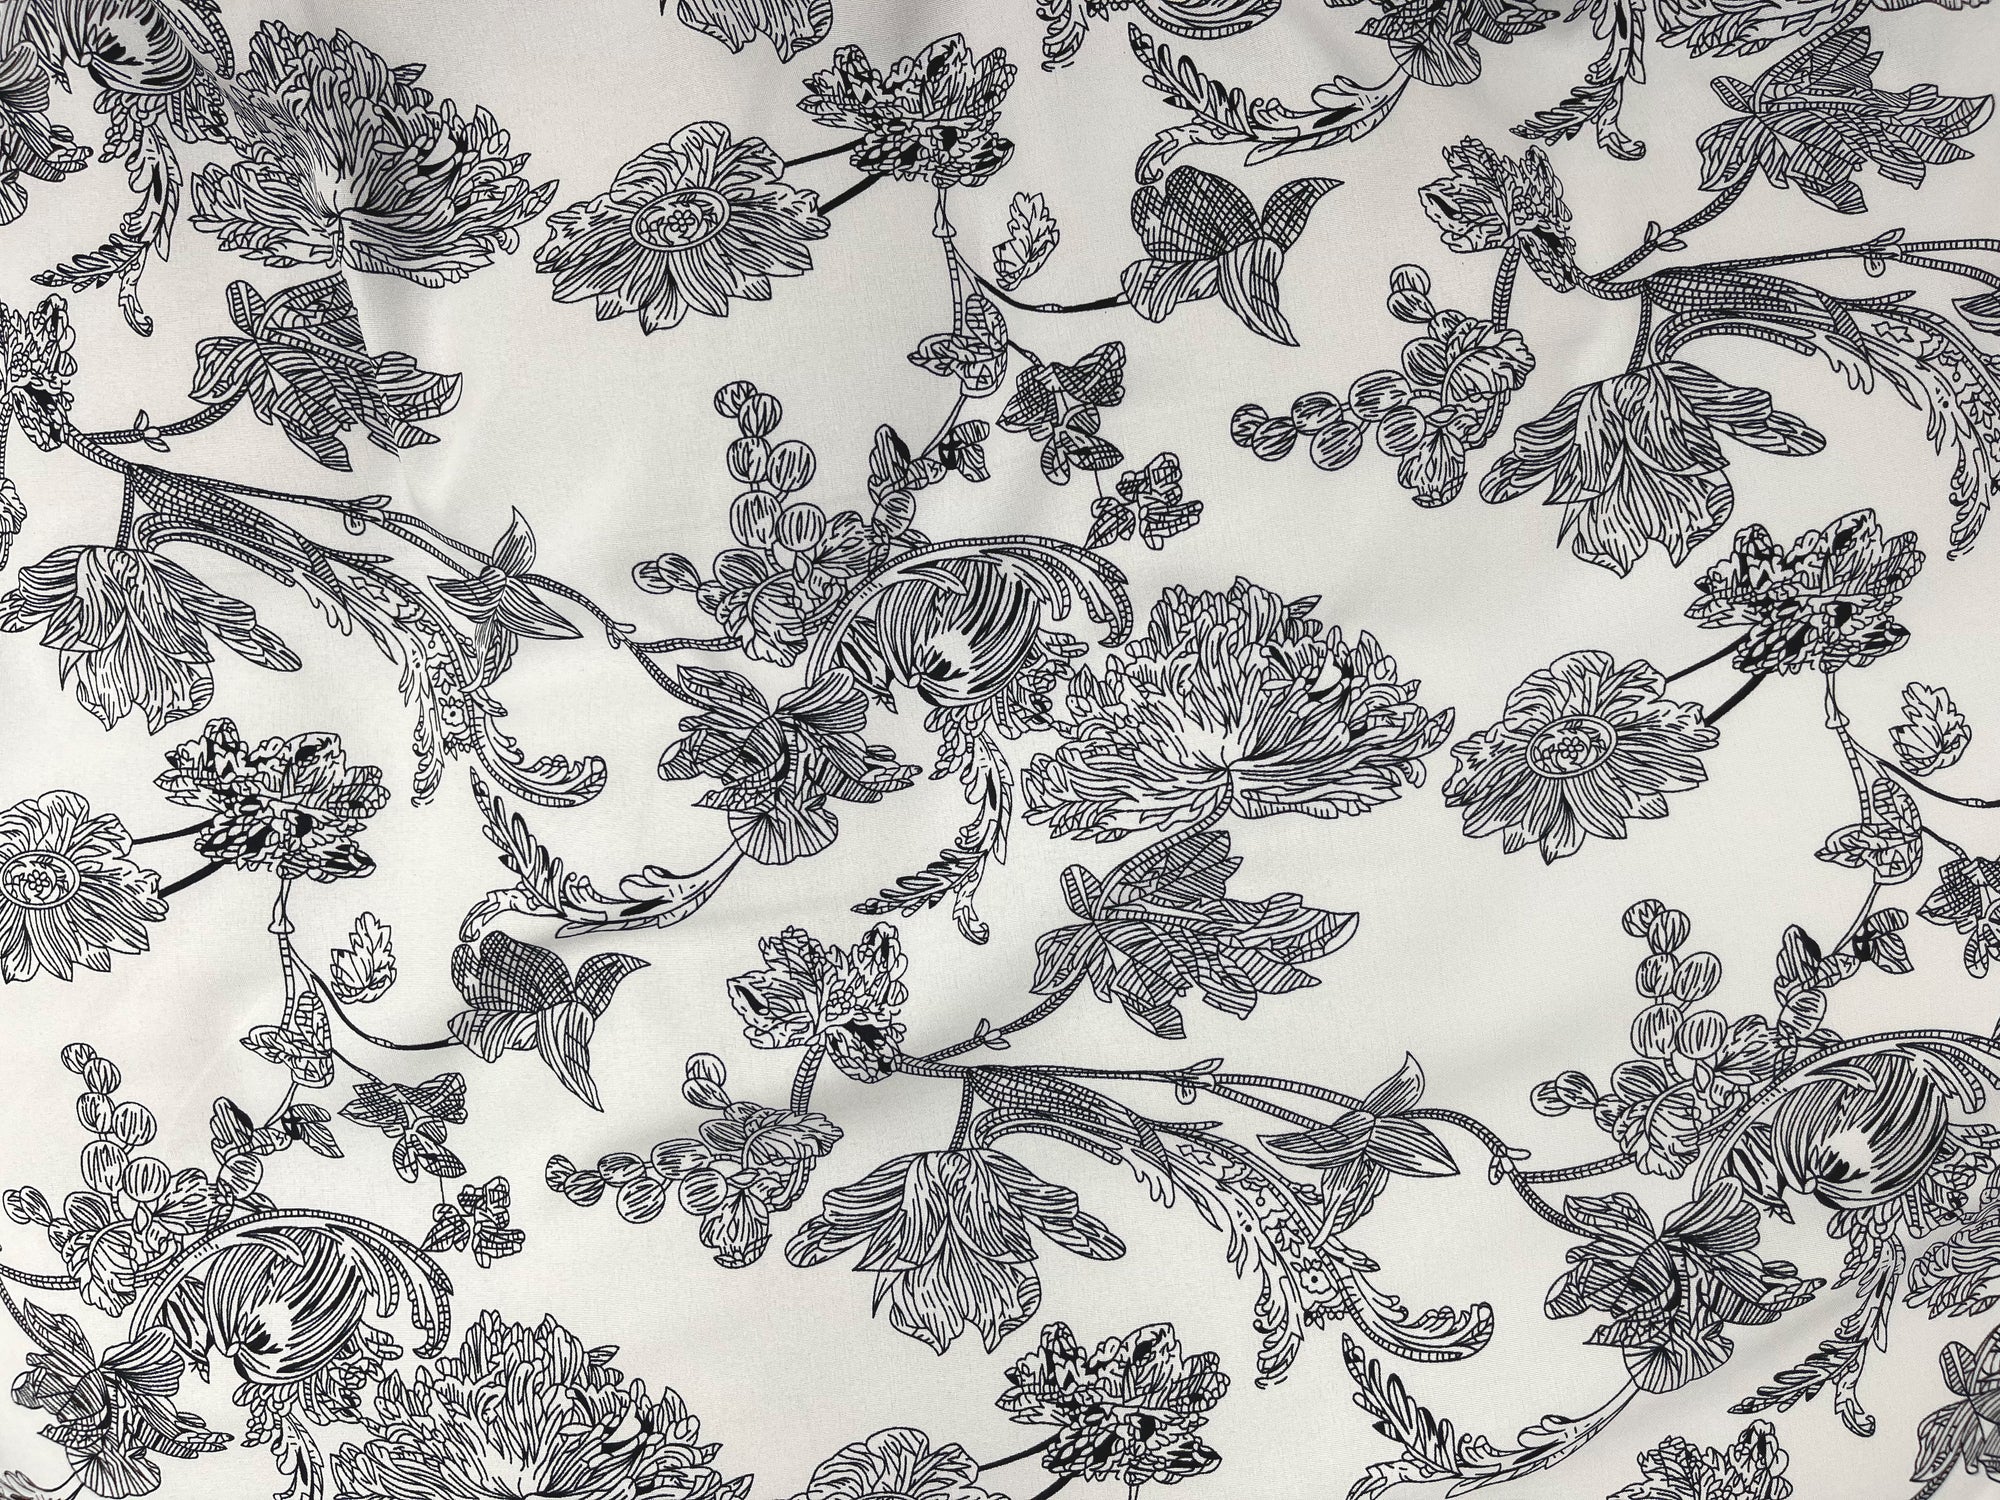 Chinese Garden - Printed Crepe Fabric